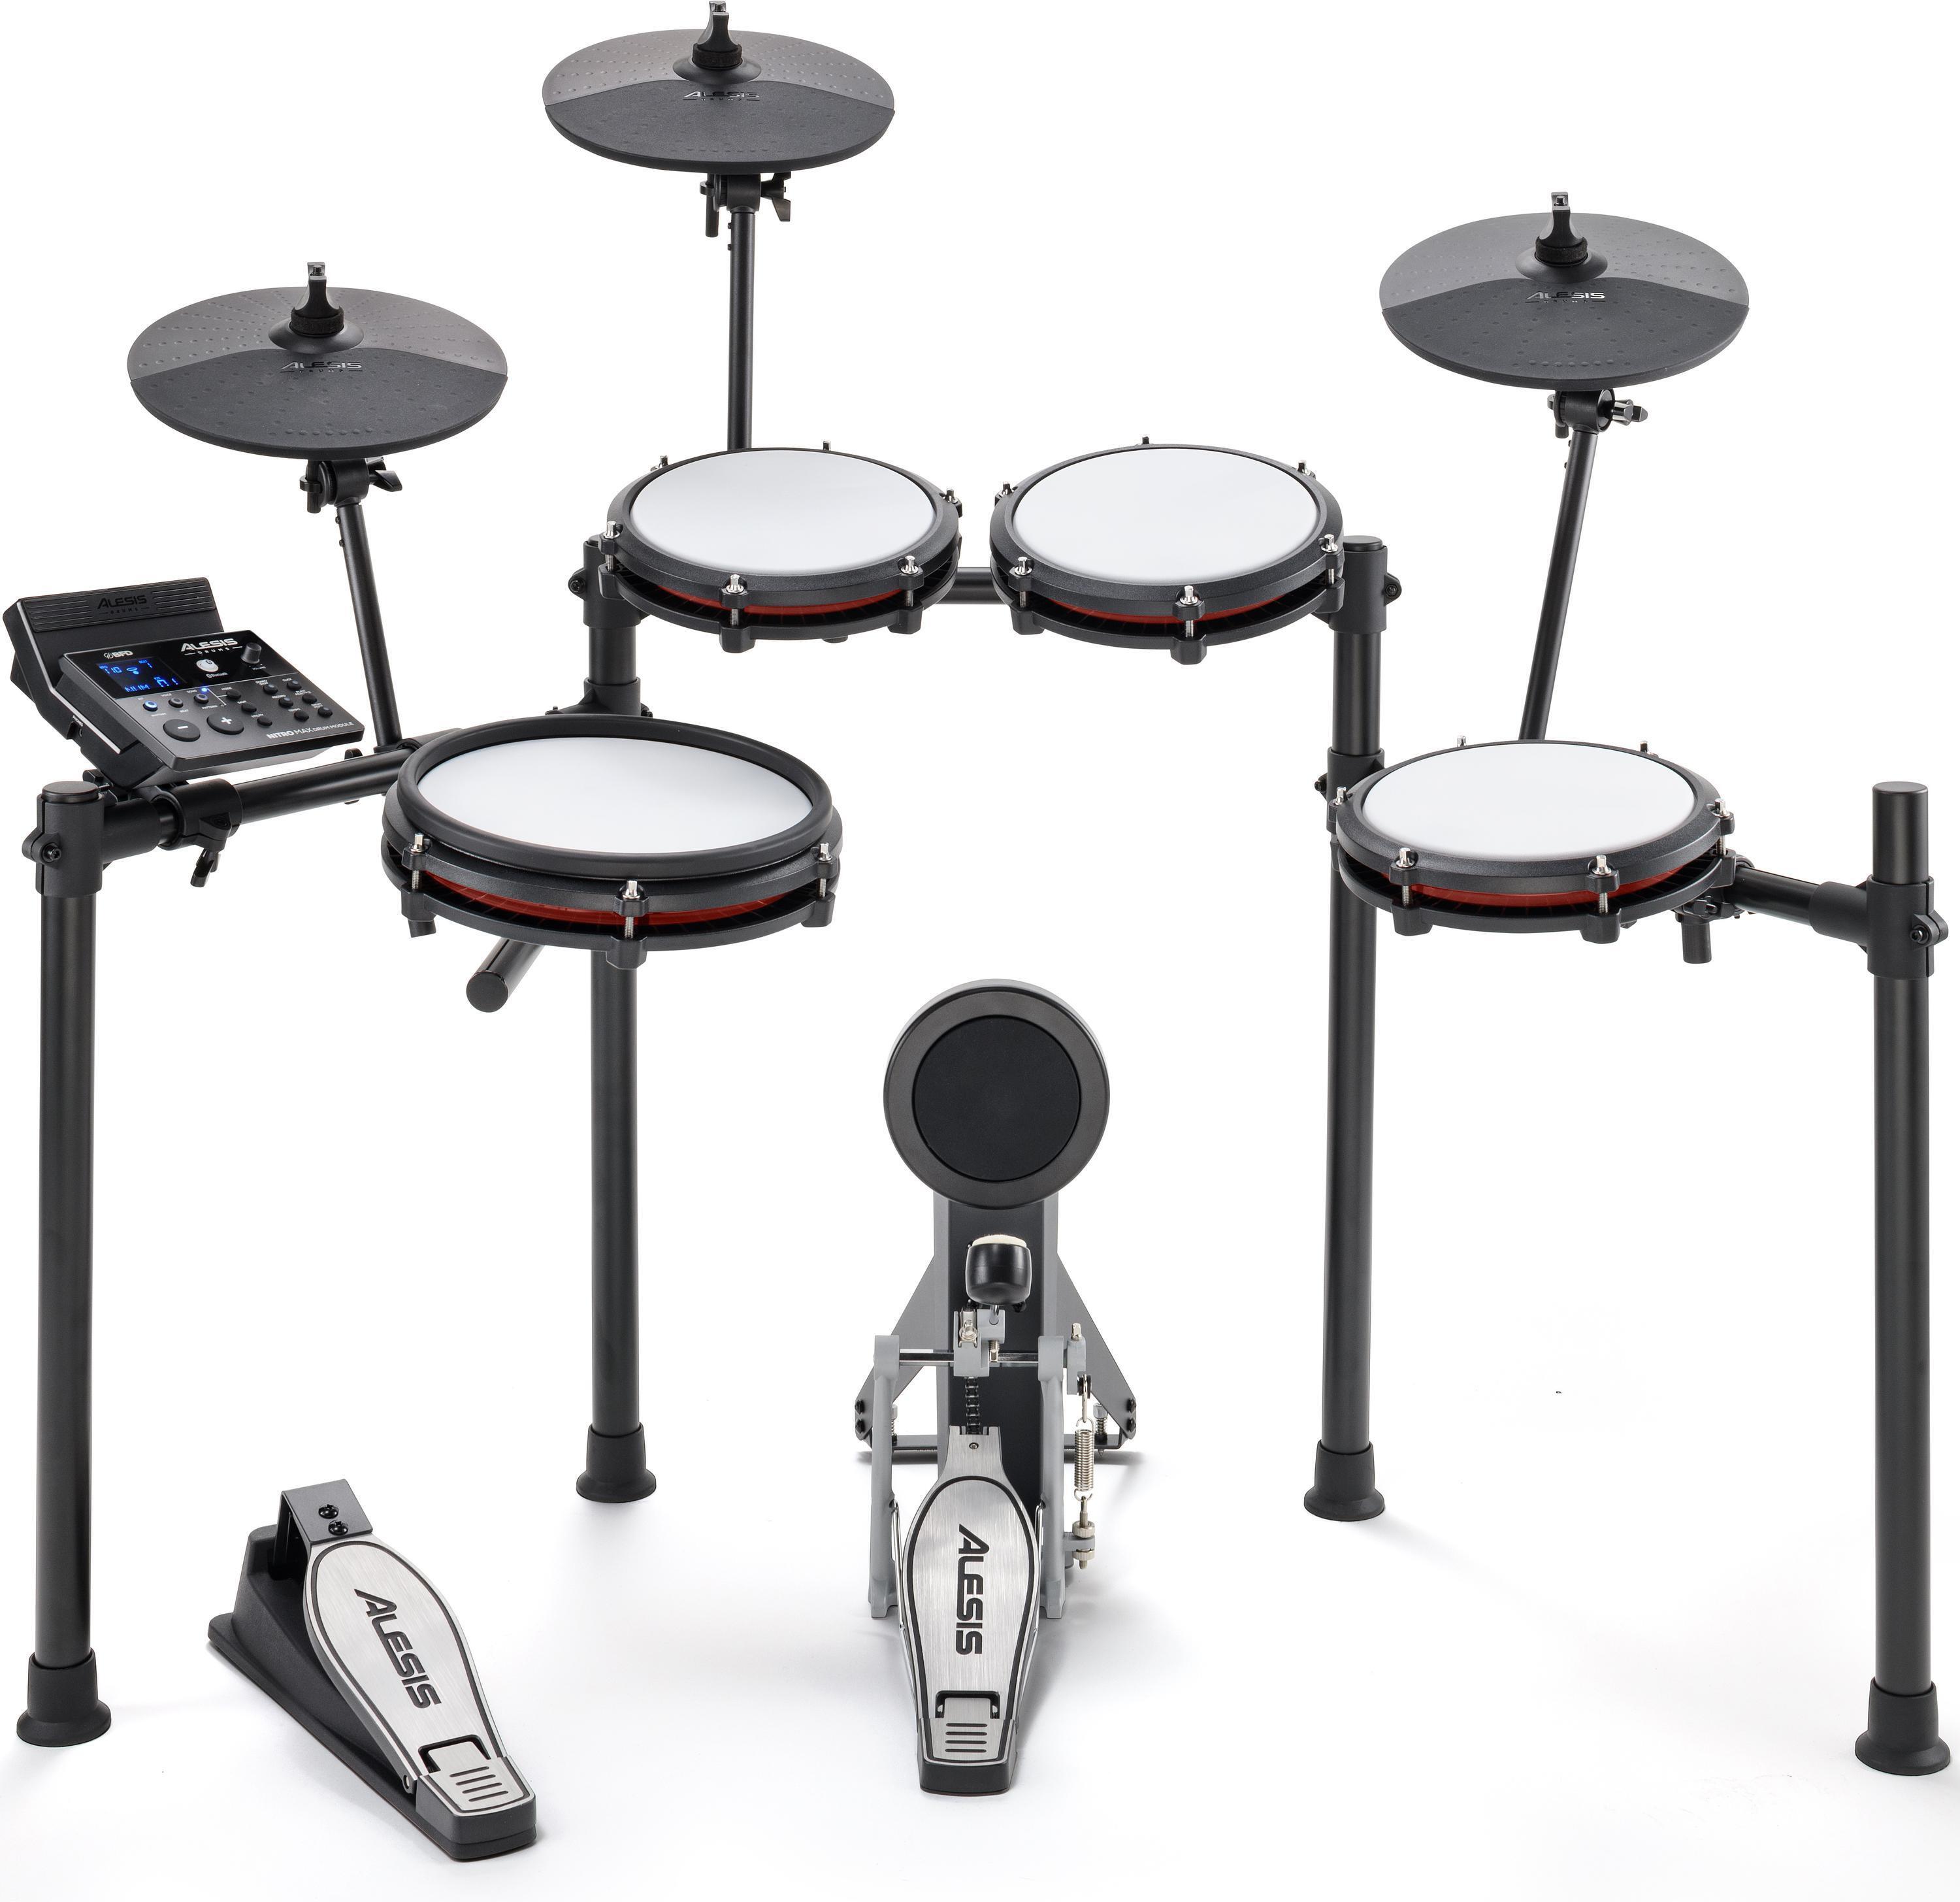 Drum　Drum　Electronic　Alesis　Plug-in　and　SSD5　Steven　Max　Drums　Nitro　Instrument　Sweetwater　Mesh　Slate　Set　Virtual